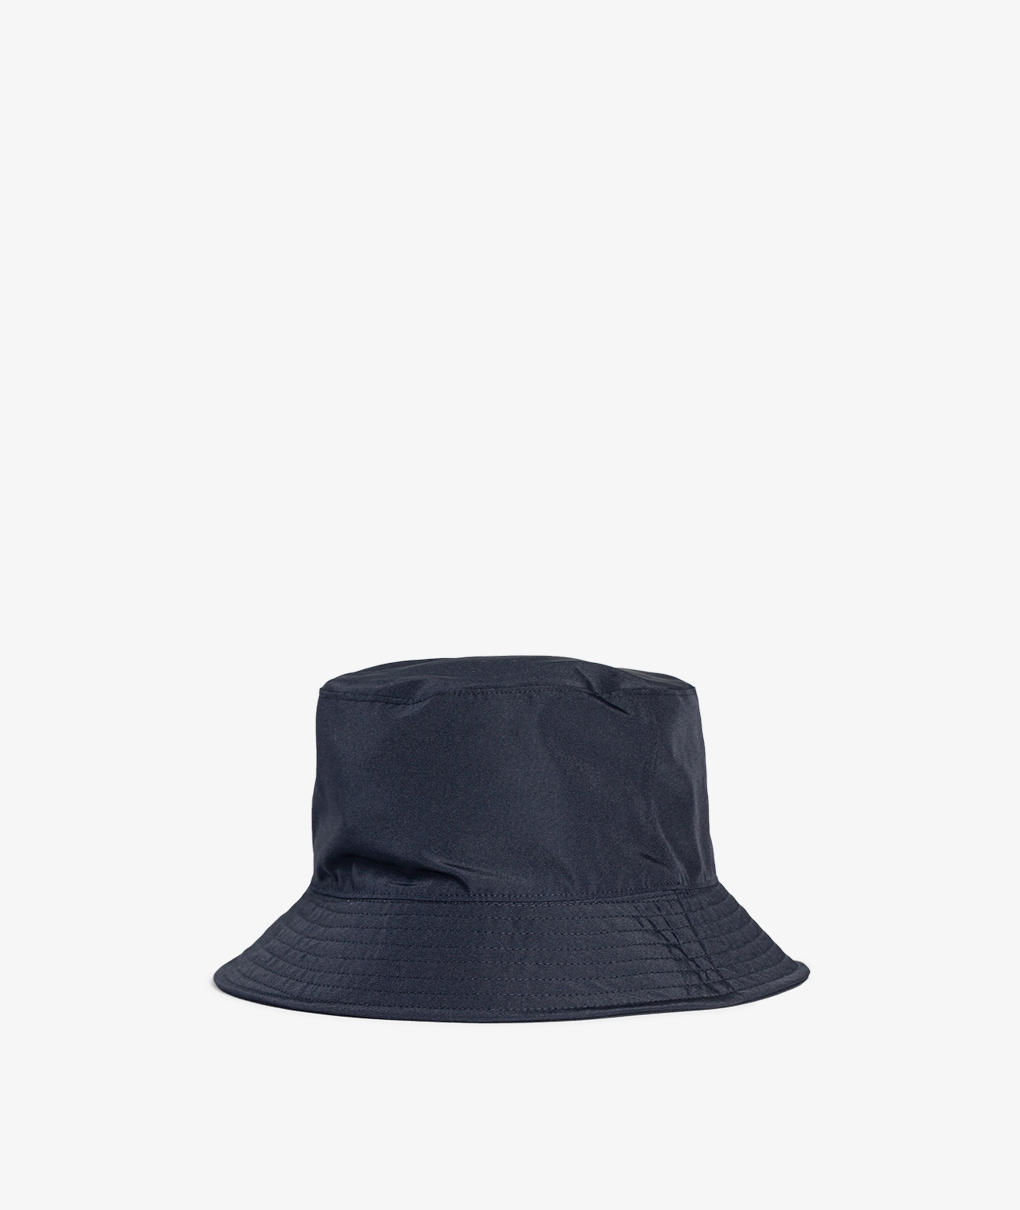 Norse Store | Shipping Worldwide - nanamica Field Hat - Navy